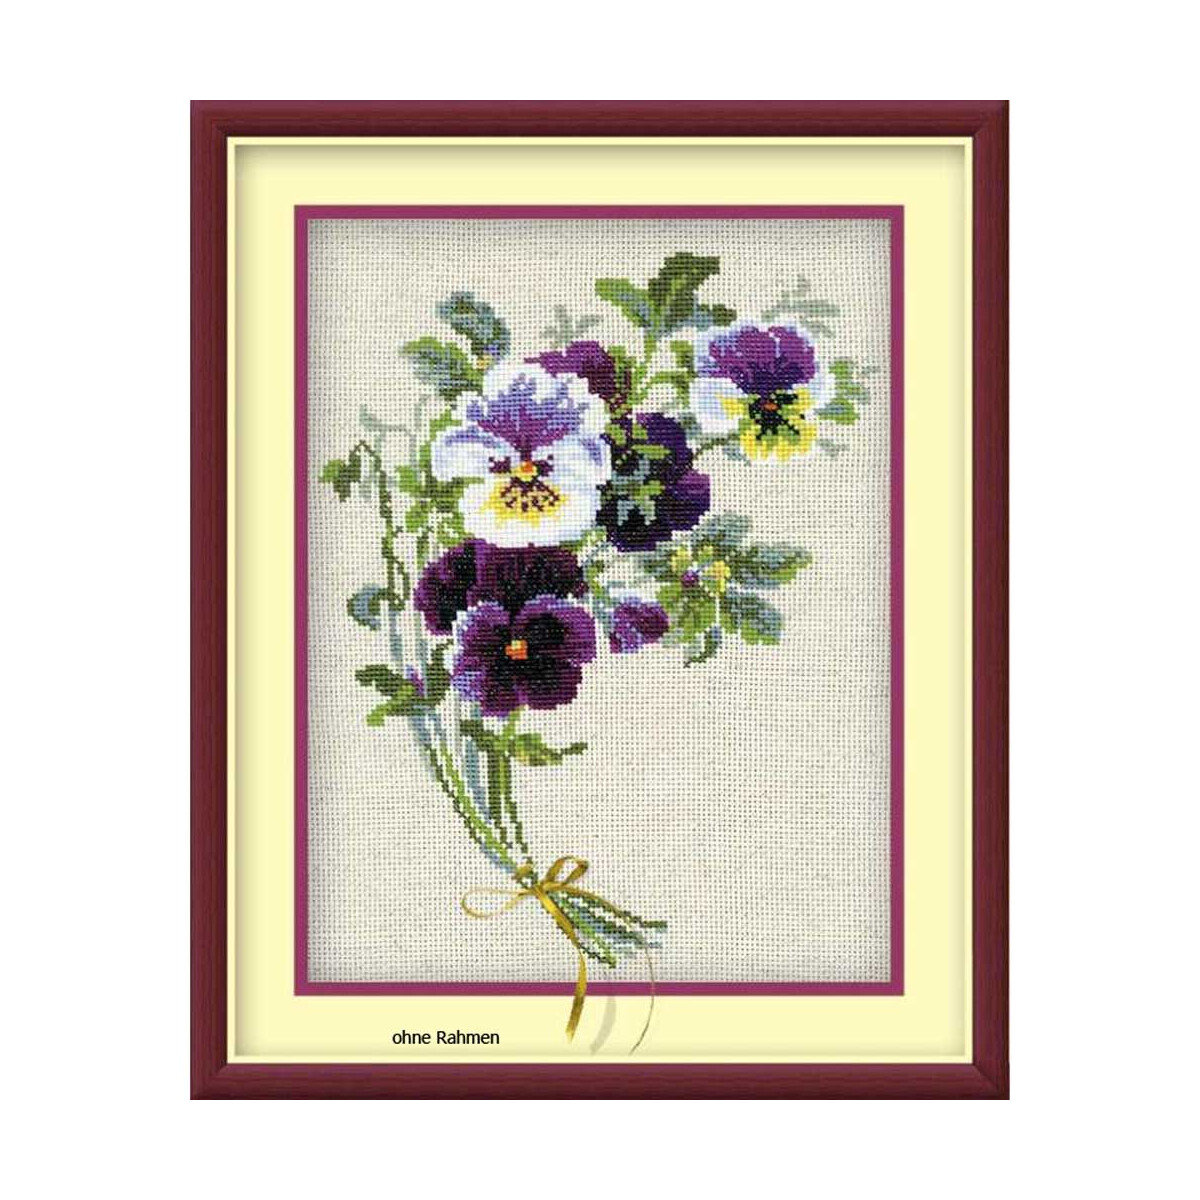 Riolis counted cross stitch Kit Bunch of Pansies, DIY